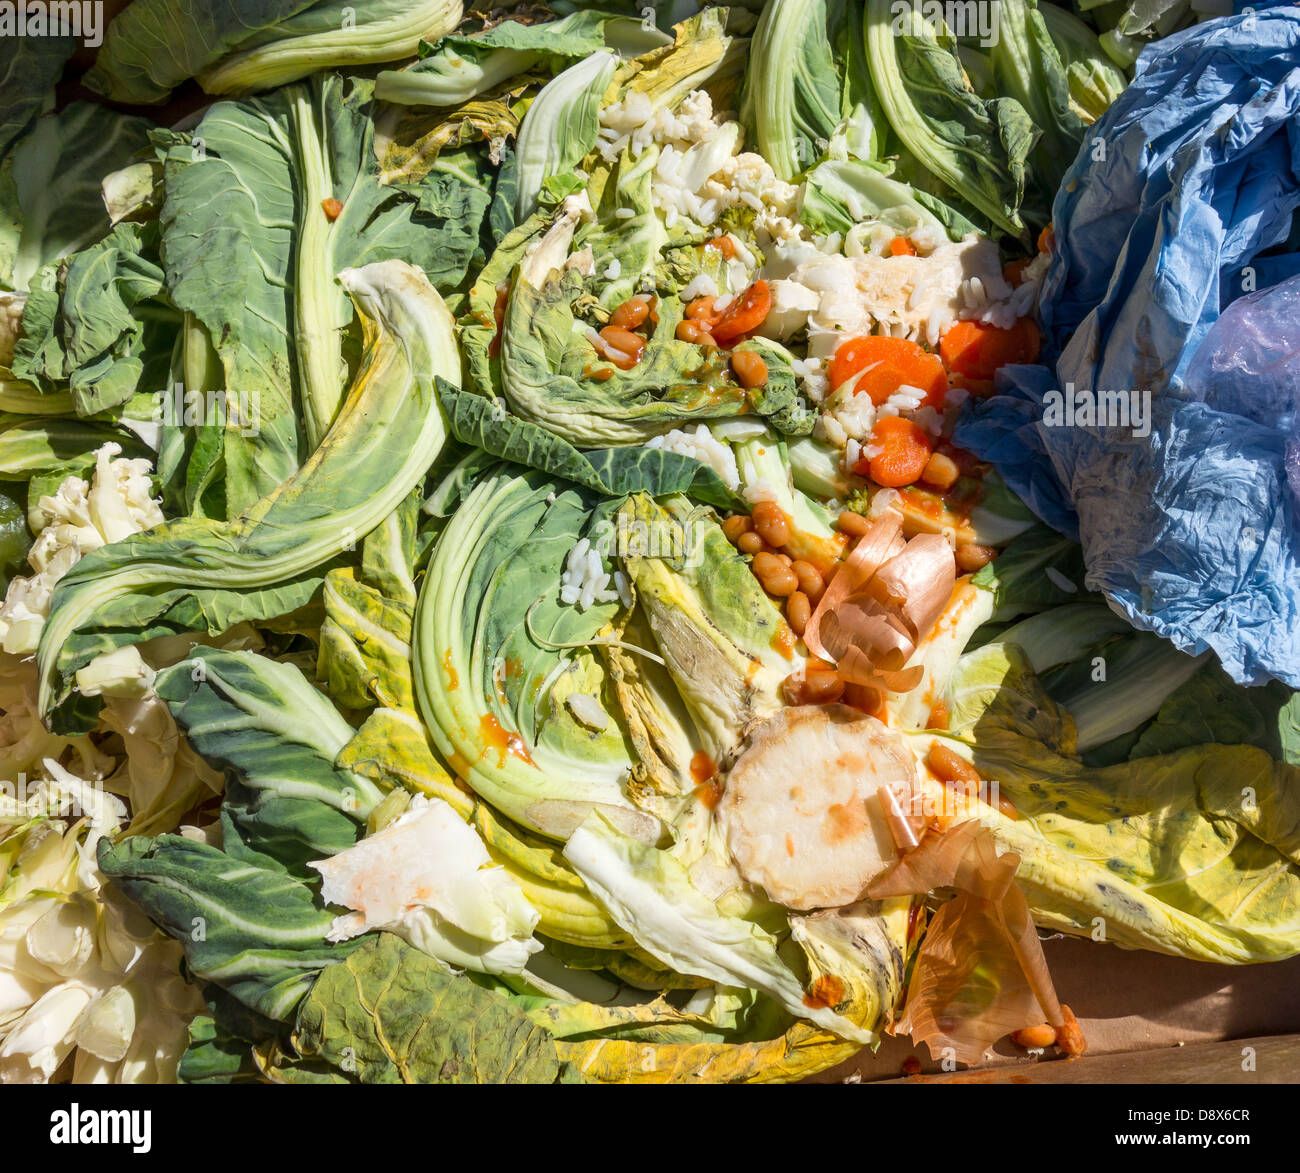 Rotting Vegetables Recycling Recycled Kitchen Waste Ready for Composting Stock Photo